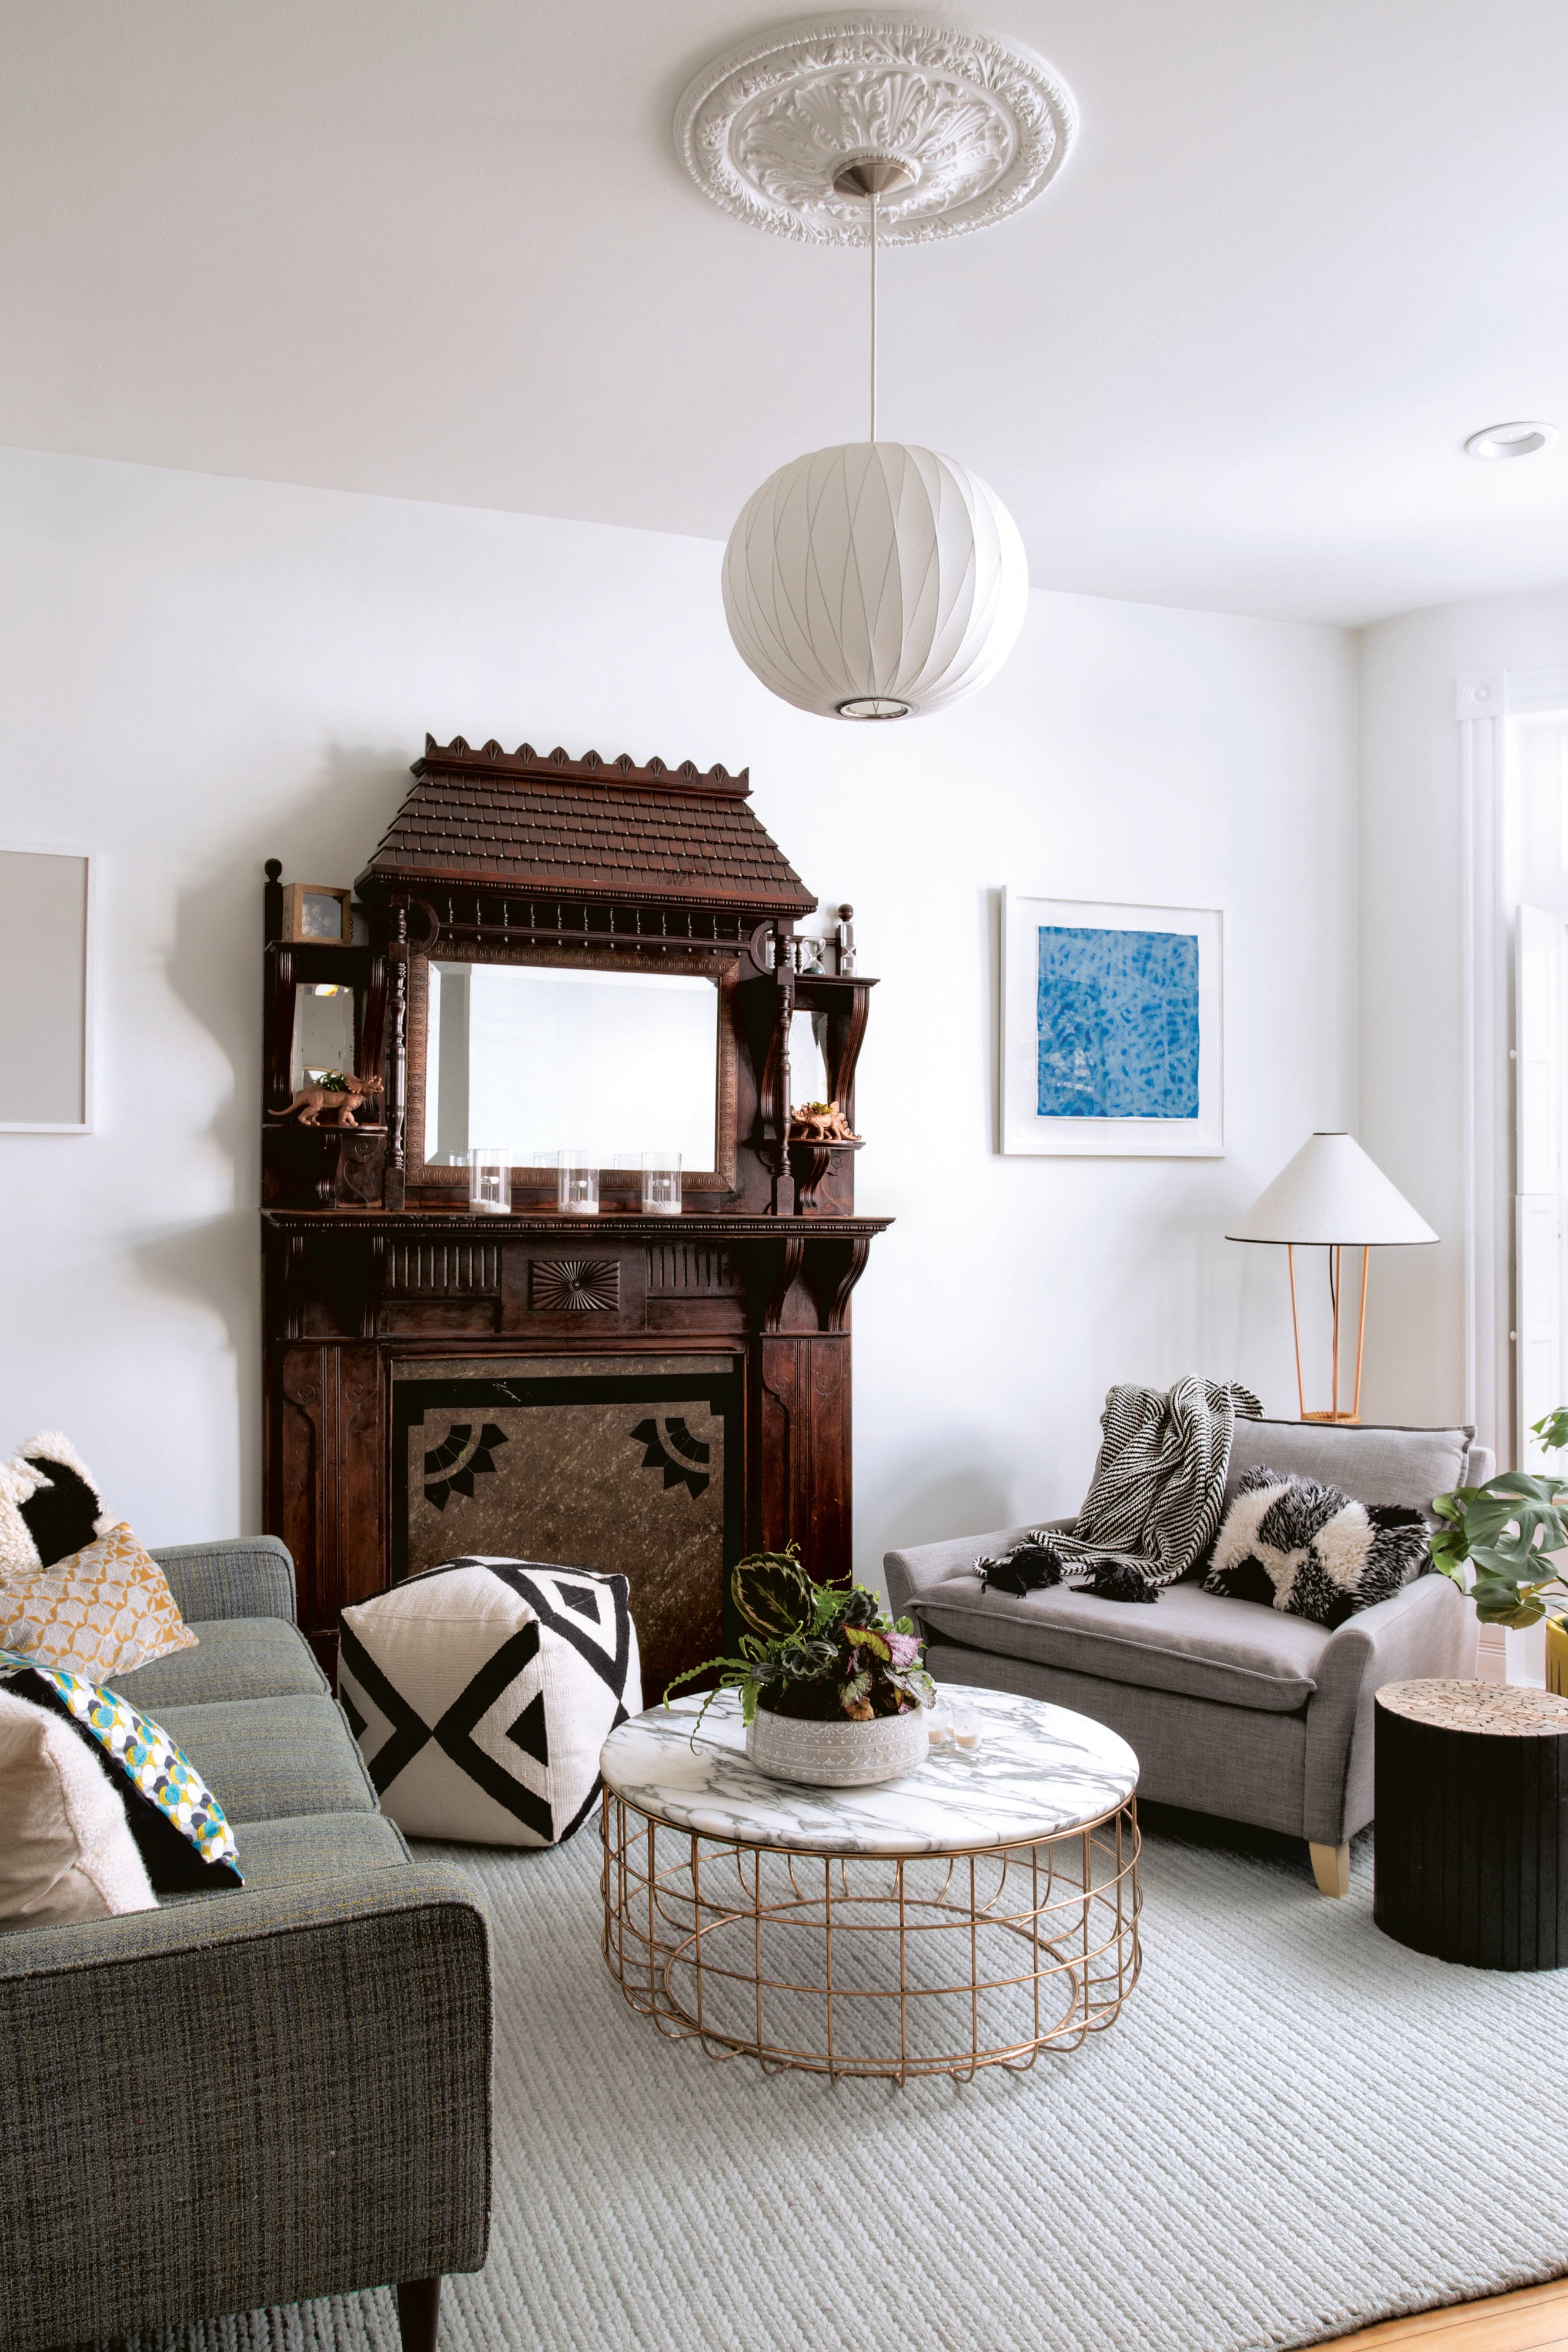 Creating contrast: Designer Nicole Lanteri chose clean-lined living-room furniture that doesn’t compete with the intricate 19th-century mantle. Photograph by Jenn Verrier Photography.